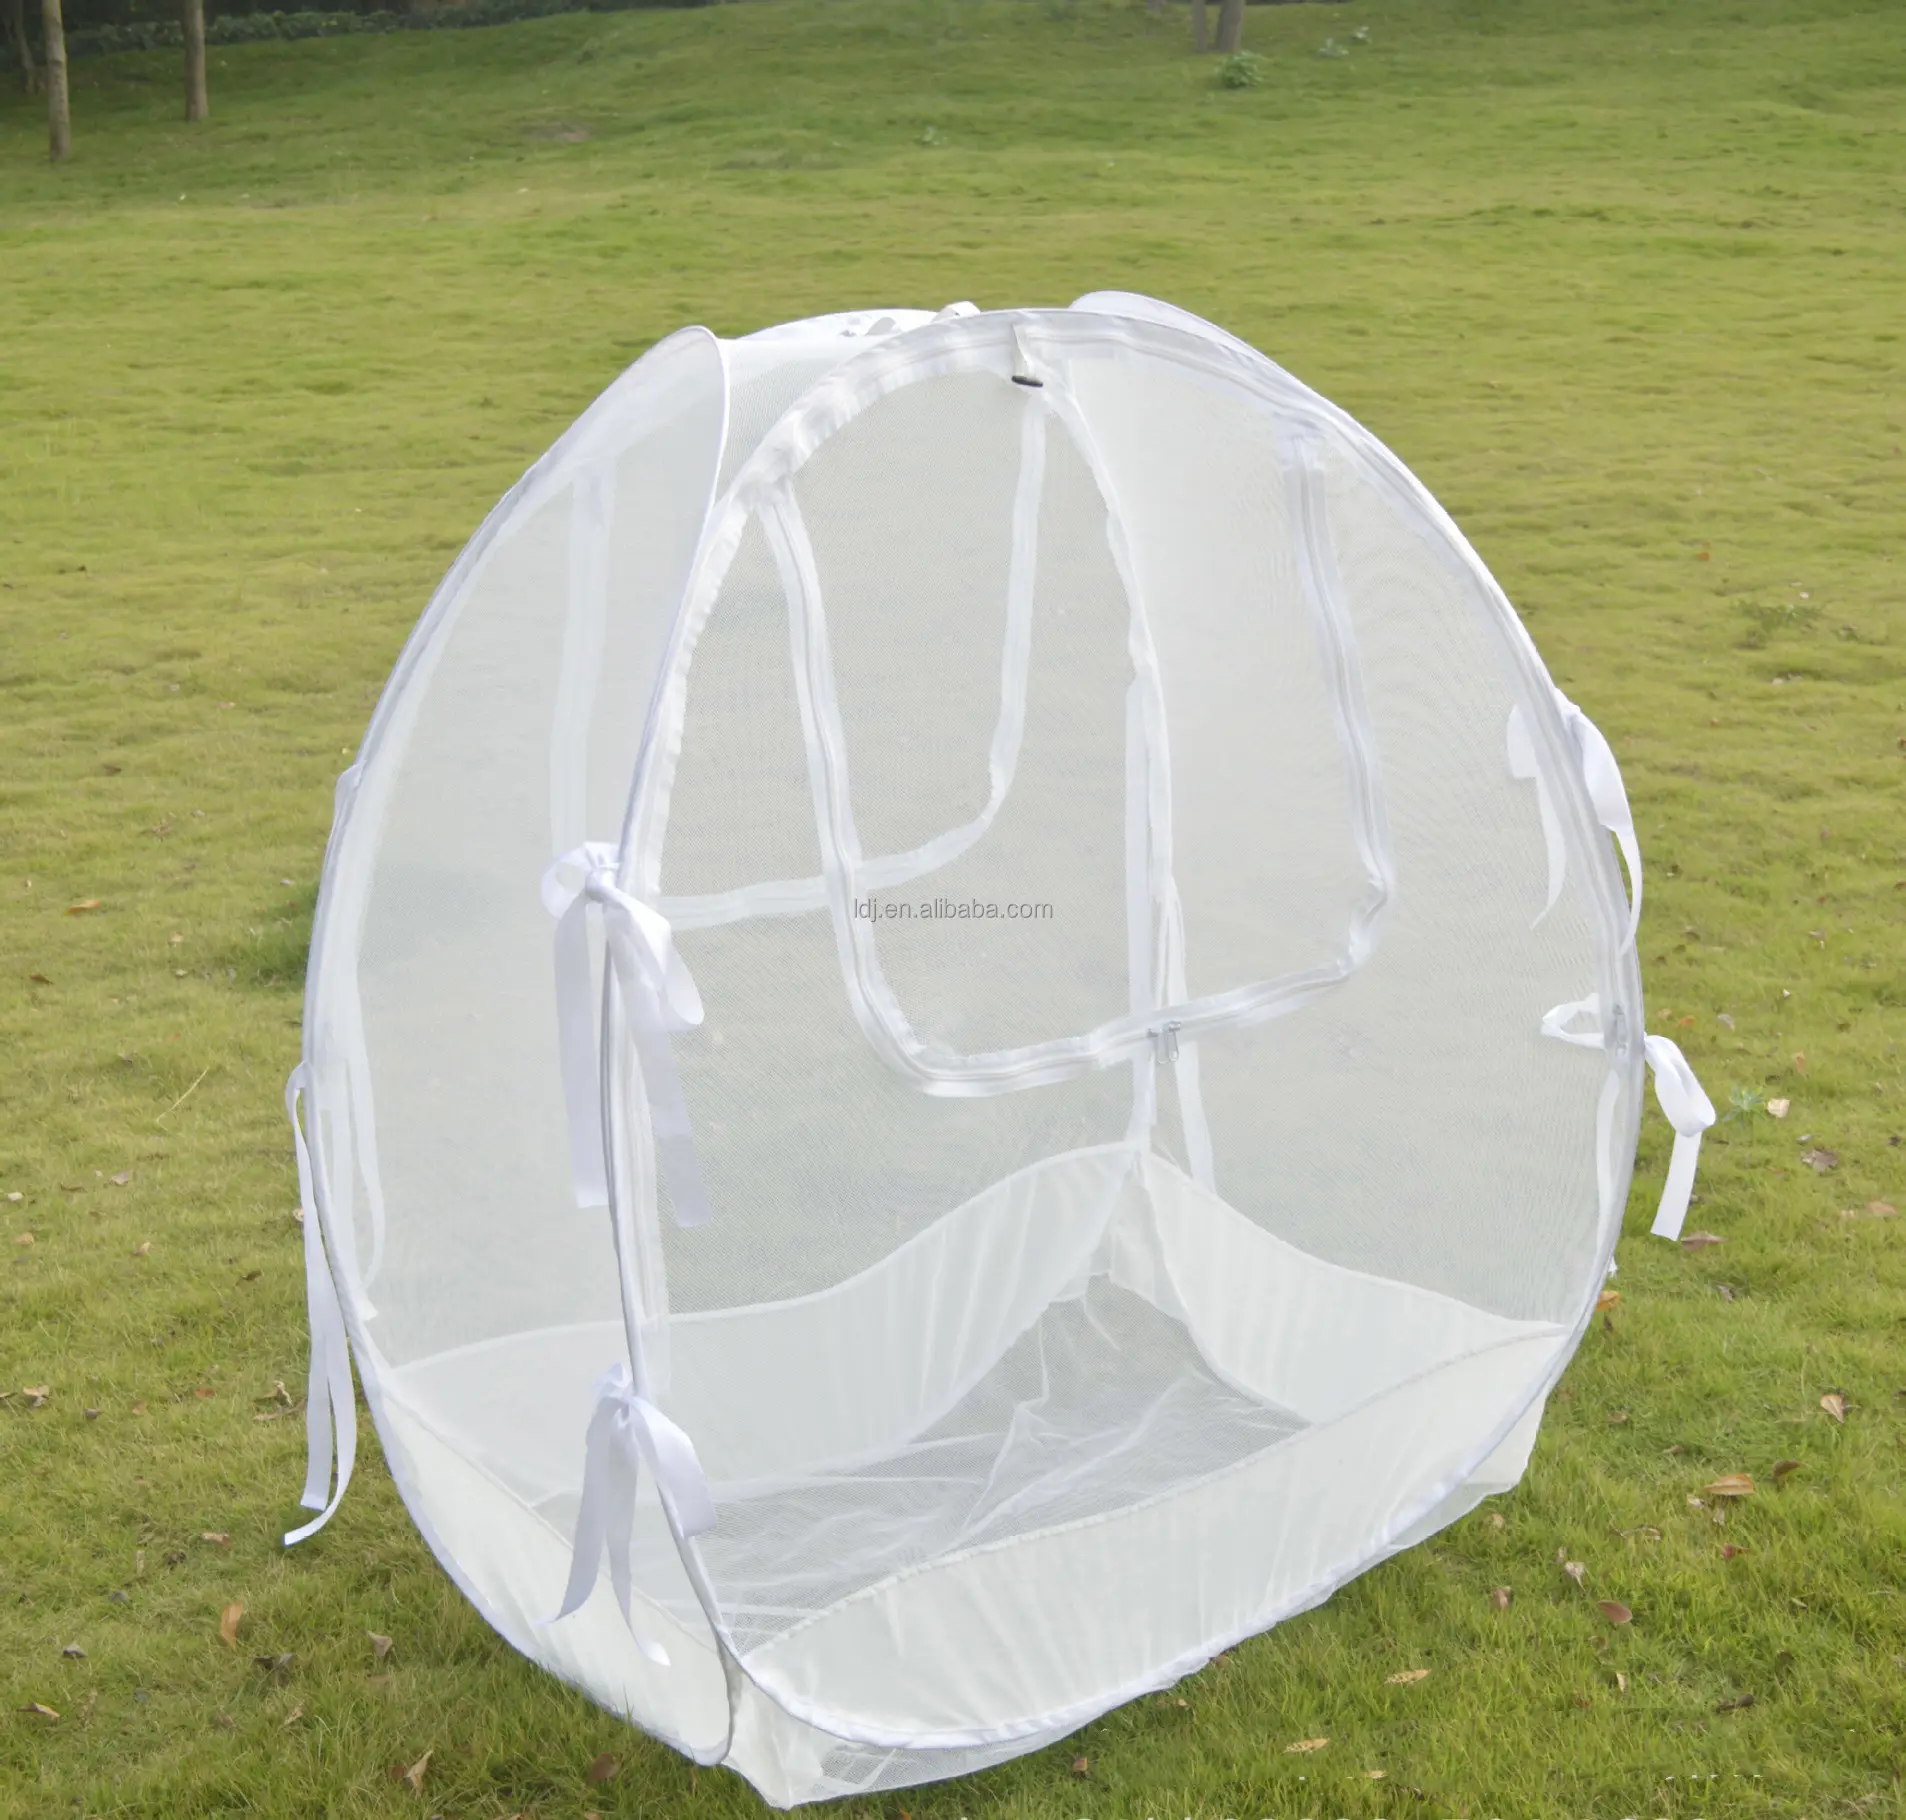 New product white color emf shielding electronic fog shielding faraday tent Canopy with opening